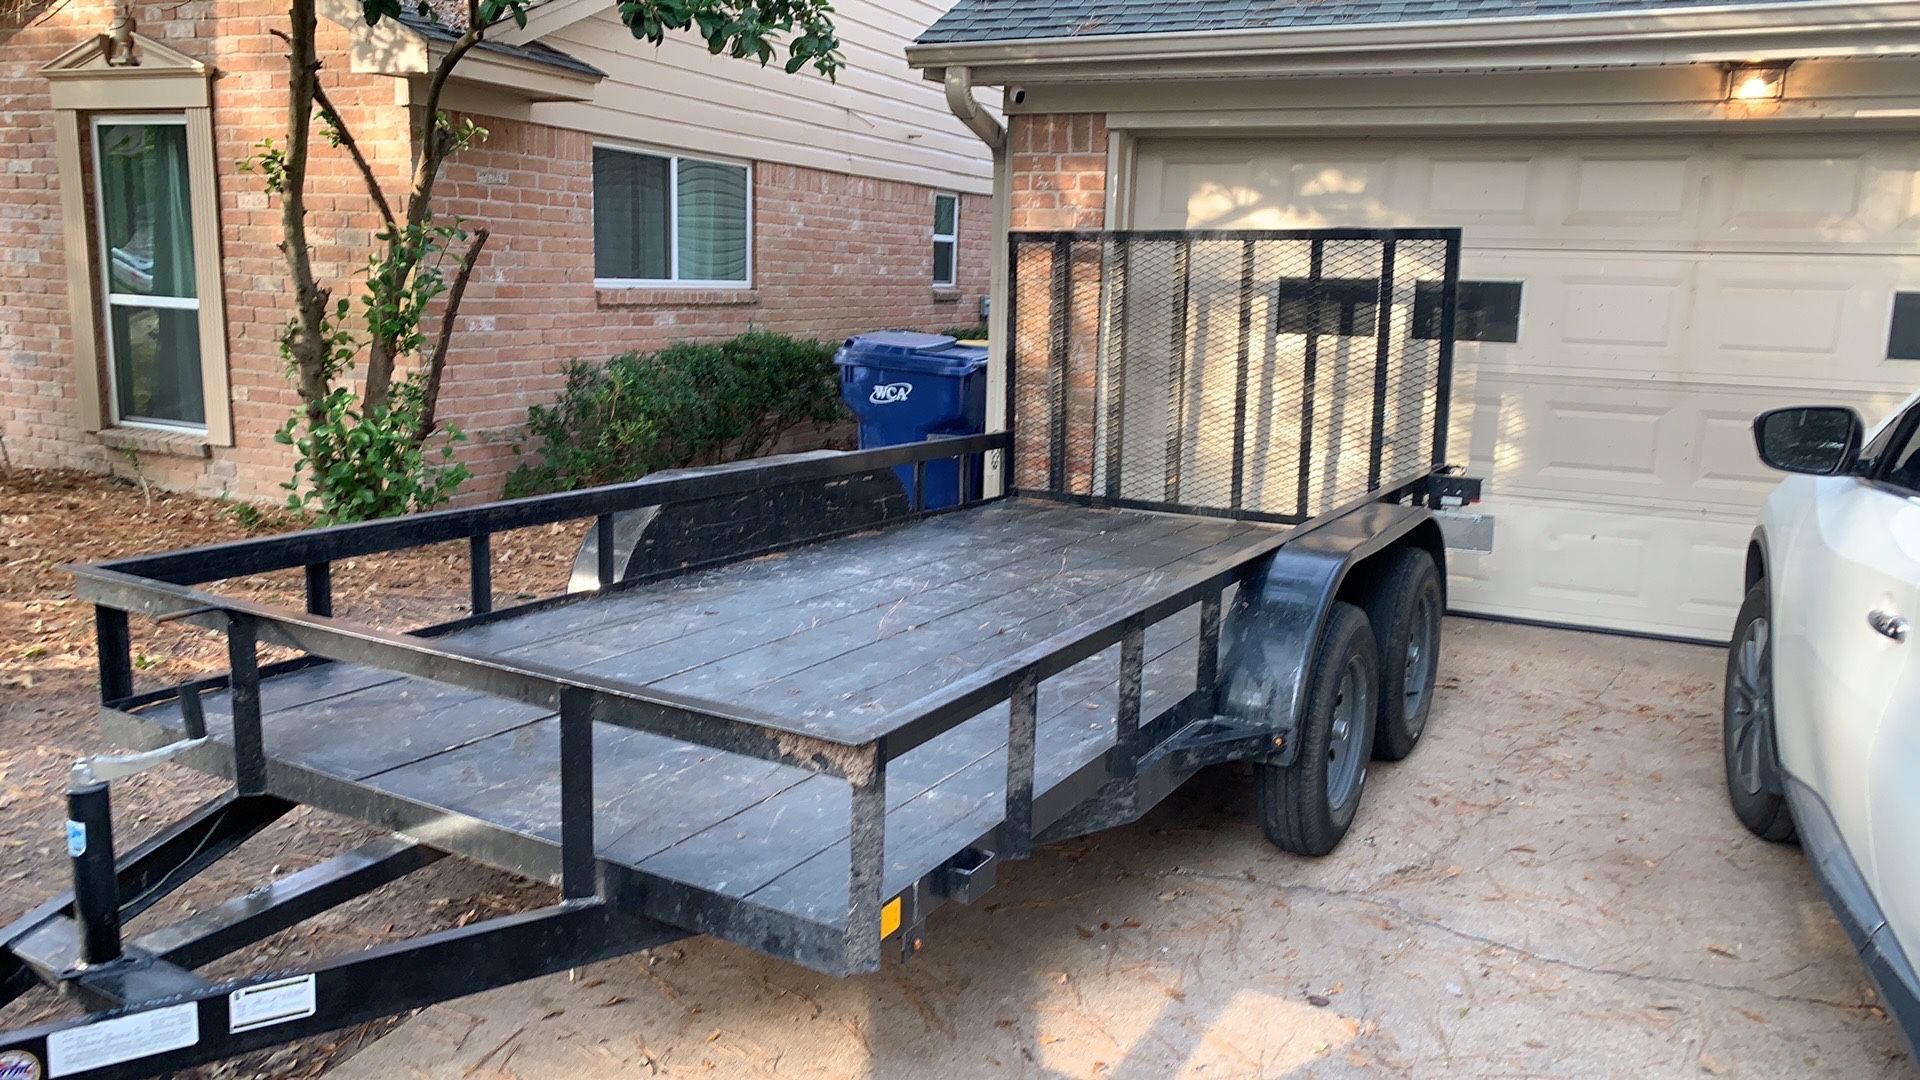 2019 76” X 14’ Trailer with loading ramp.